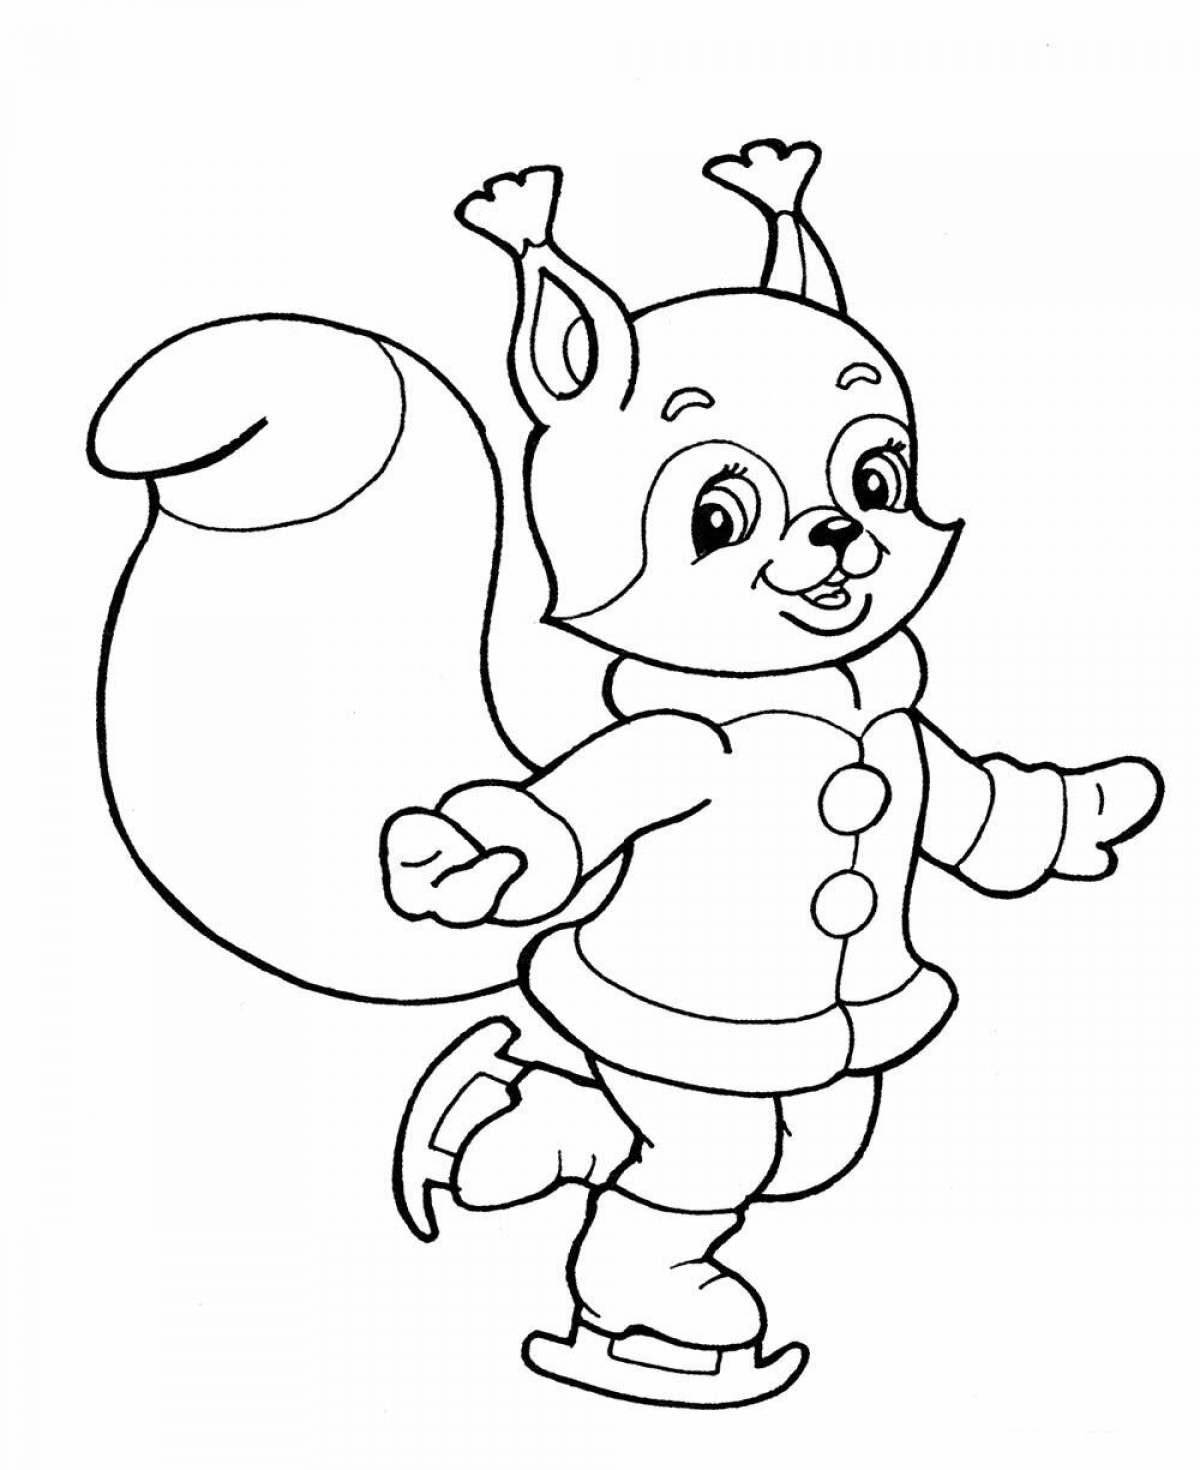 Majestic winter squirrel coloring page